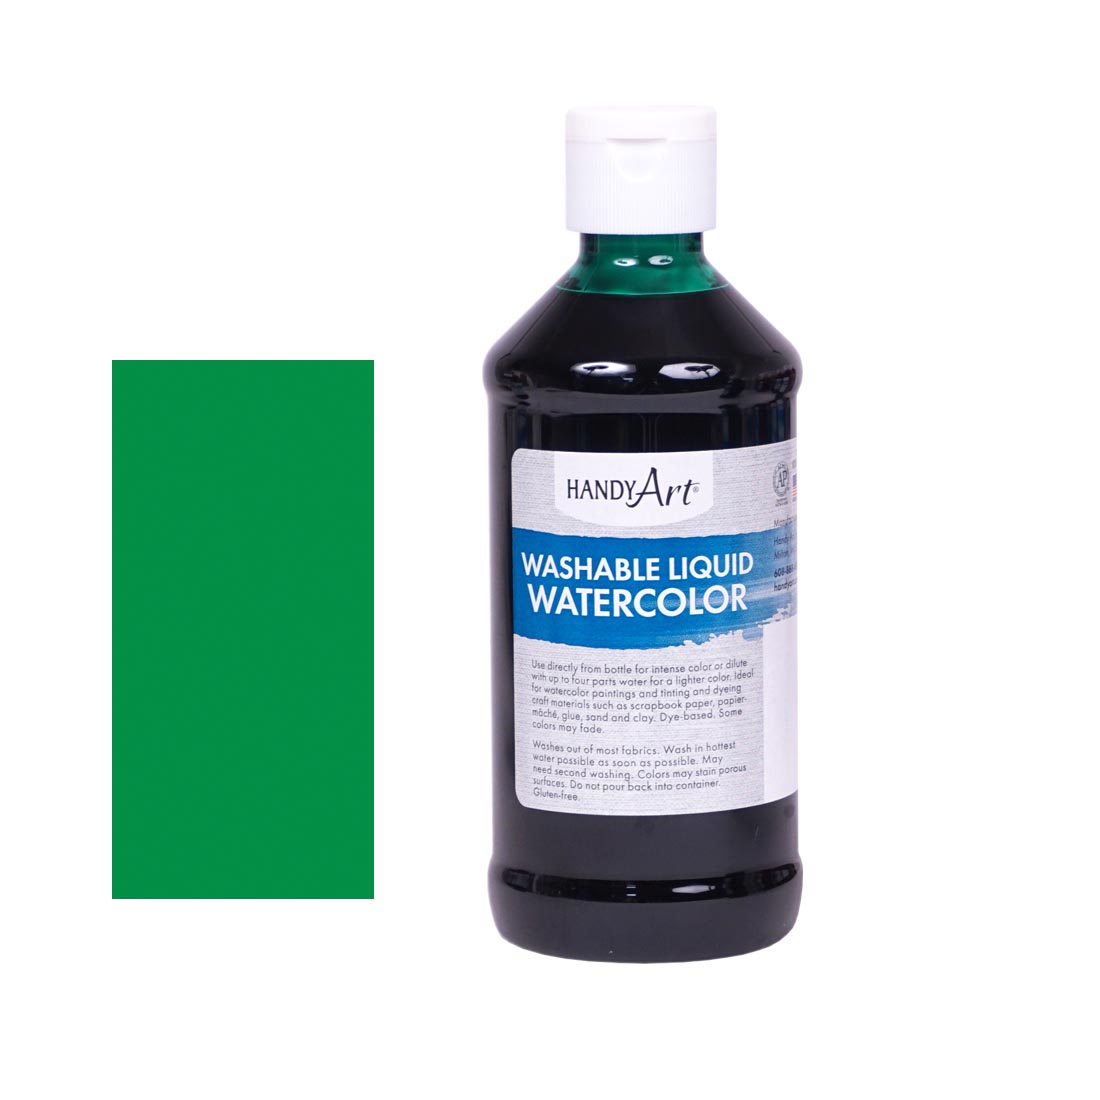 Bottle of Green Handy Art Washable Liquid Watercolor beside a rectangular color swatch